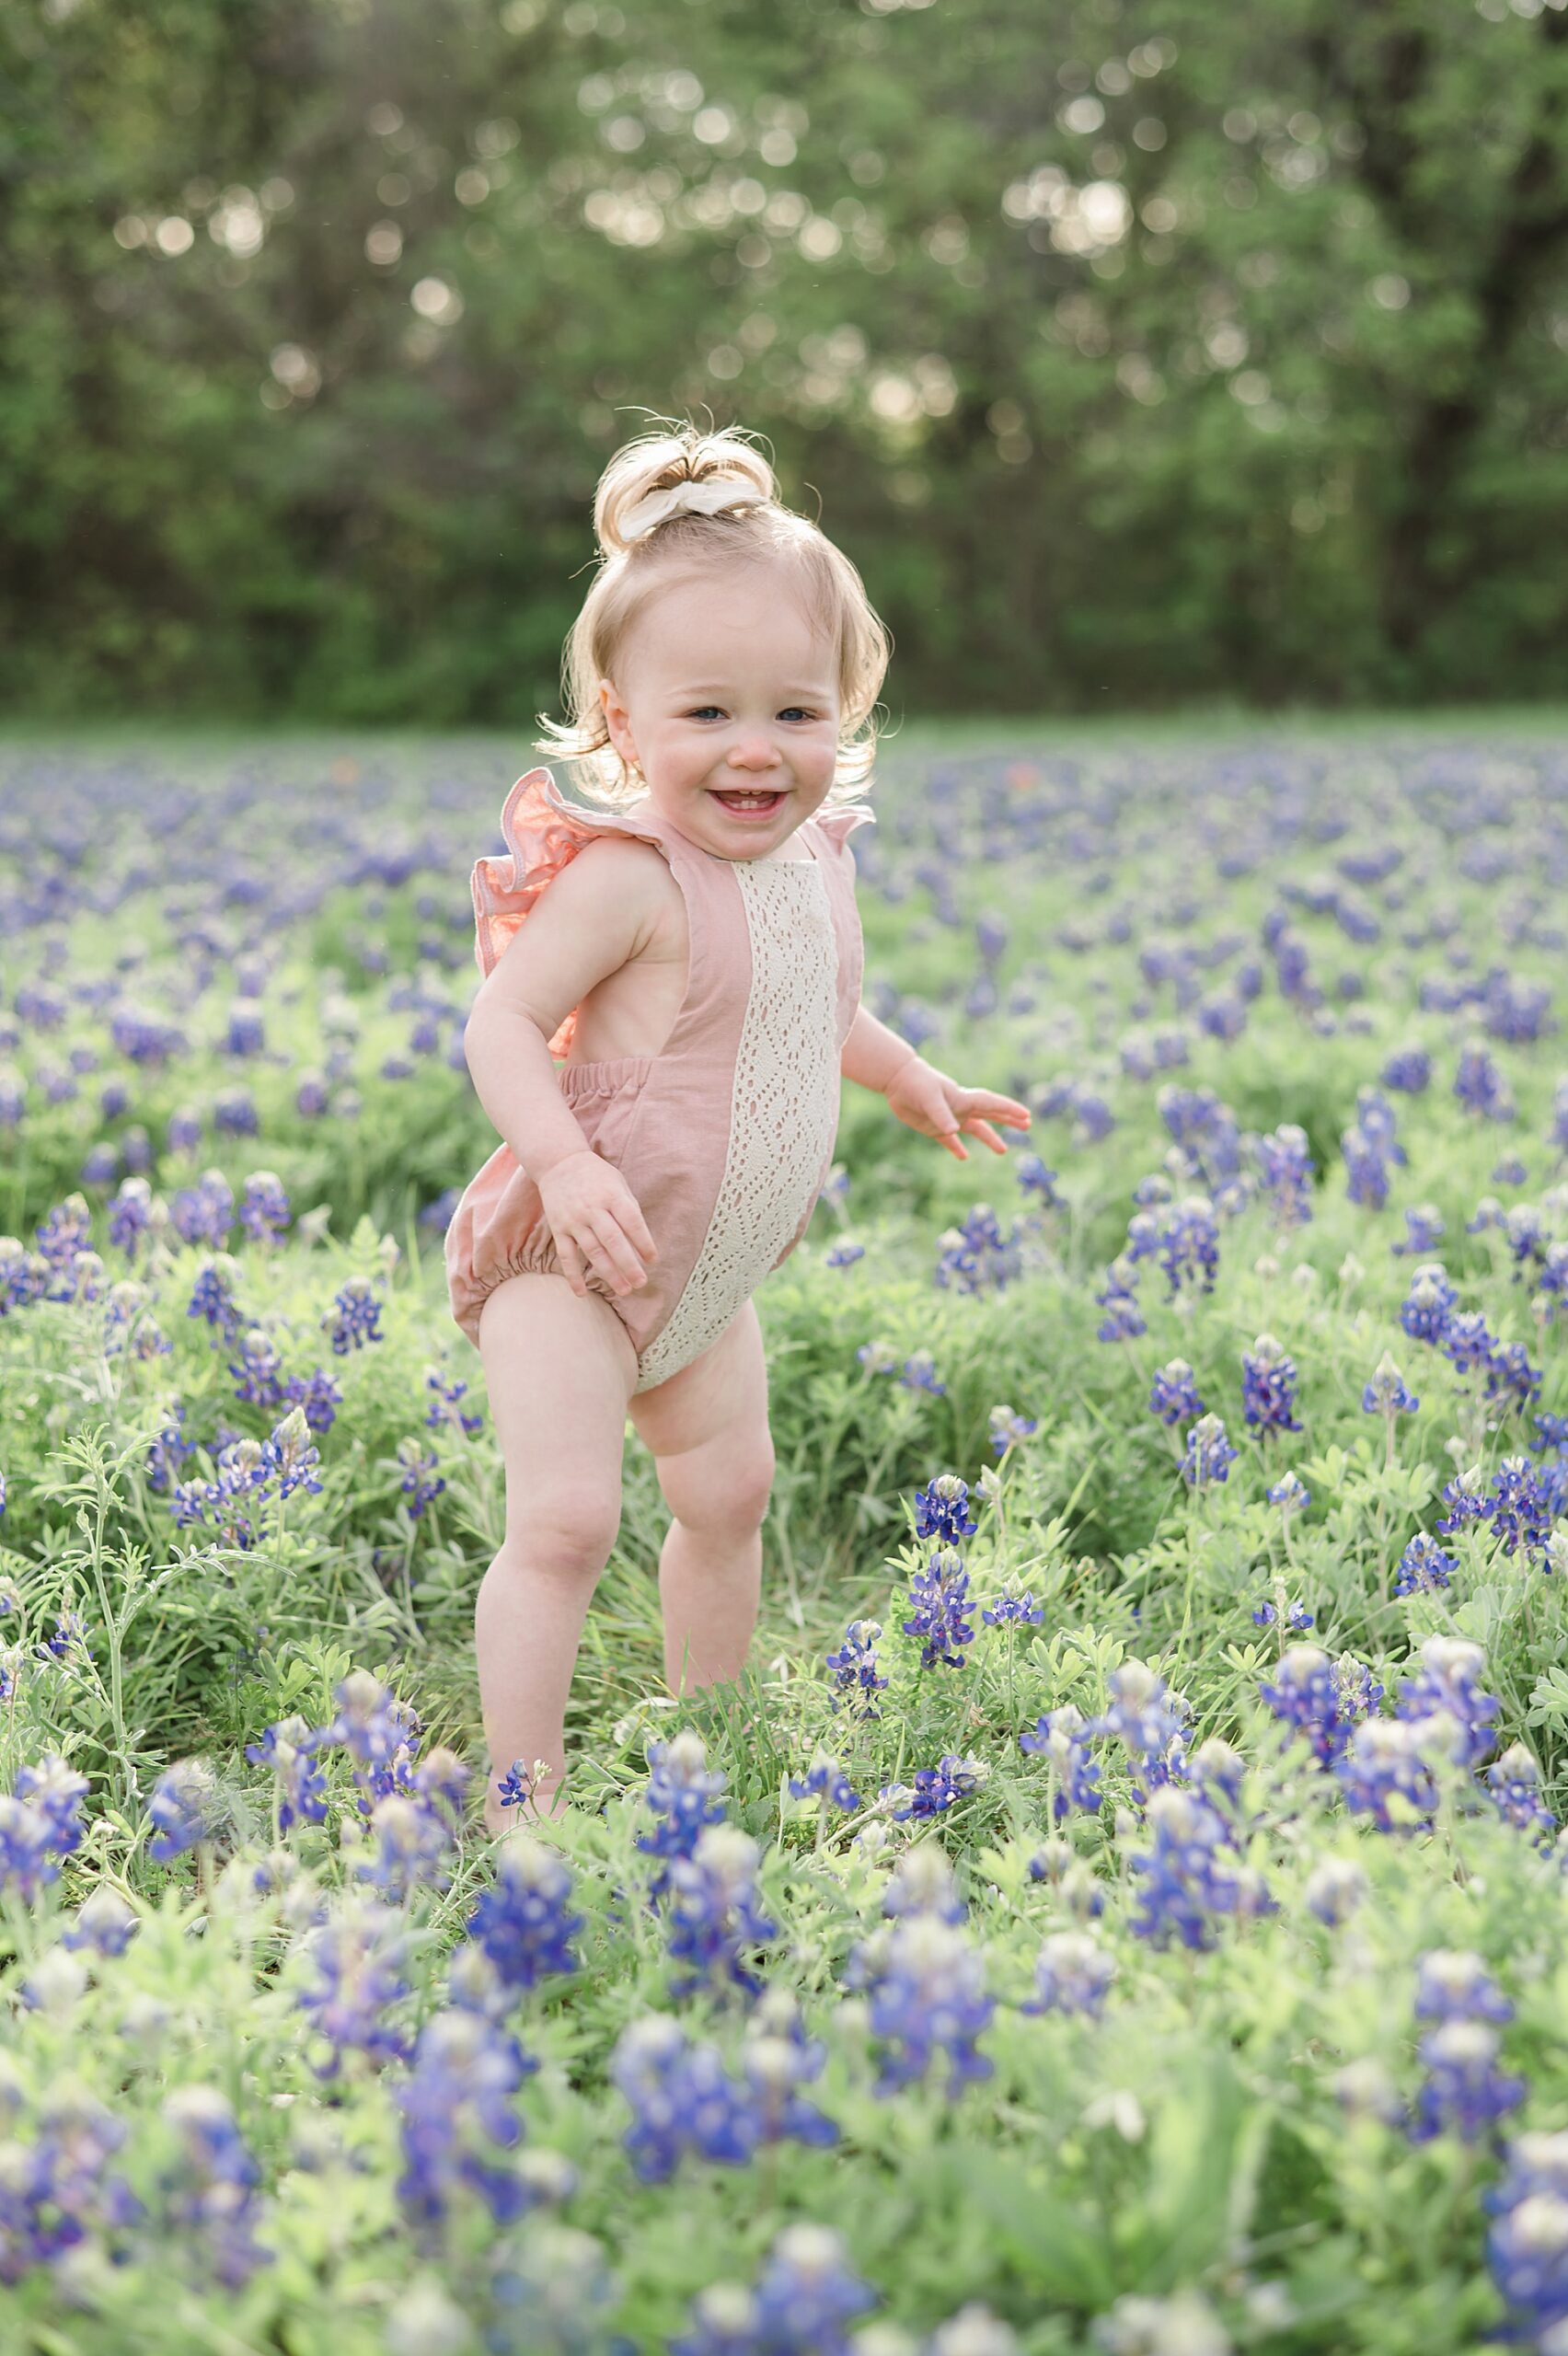 toddler girl stands in field of Bluebonnet flowers photographed by Lindsey Dutton Photography, a Dallas family photographer